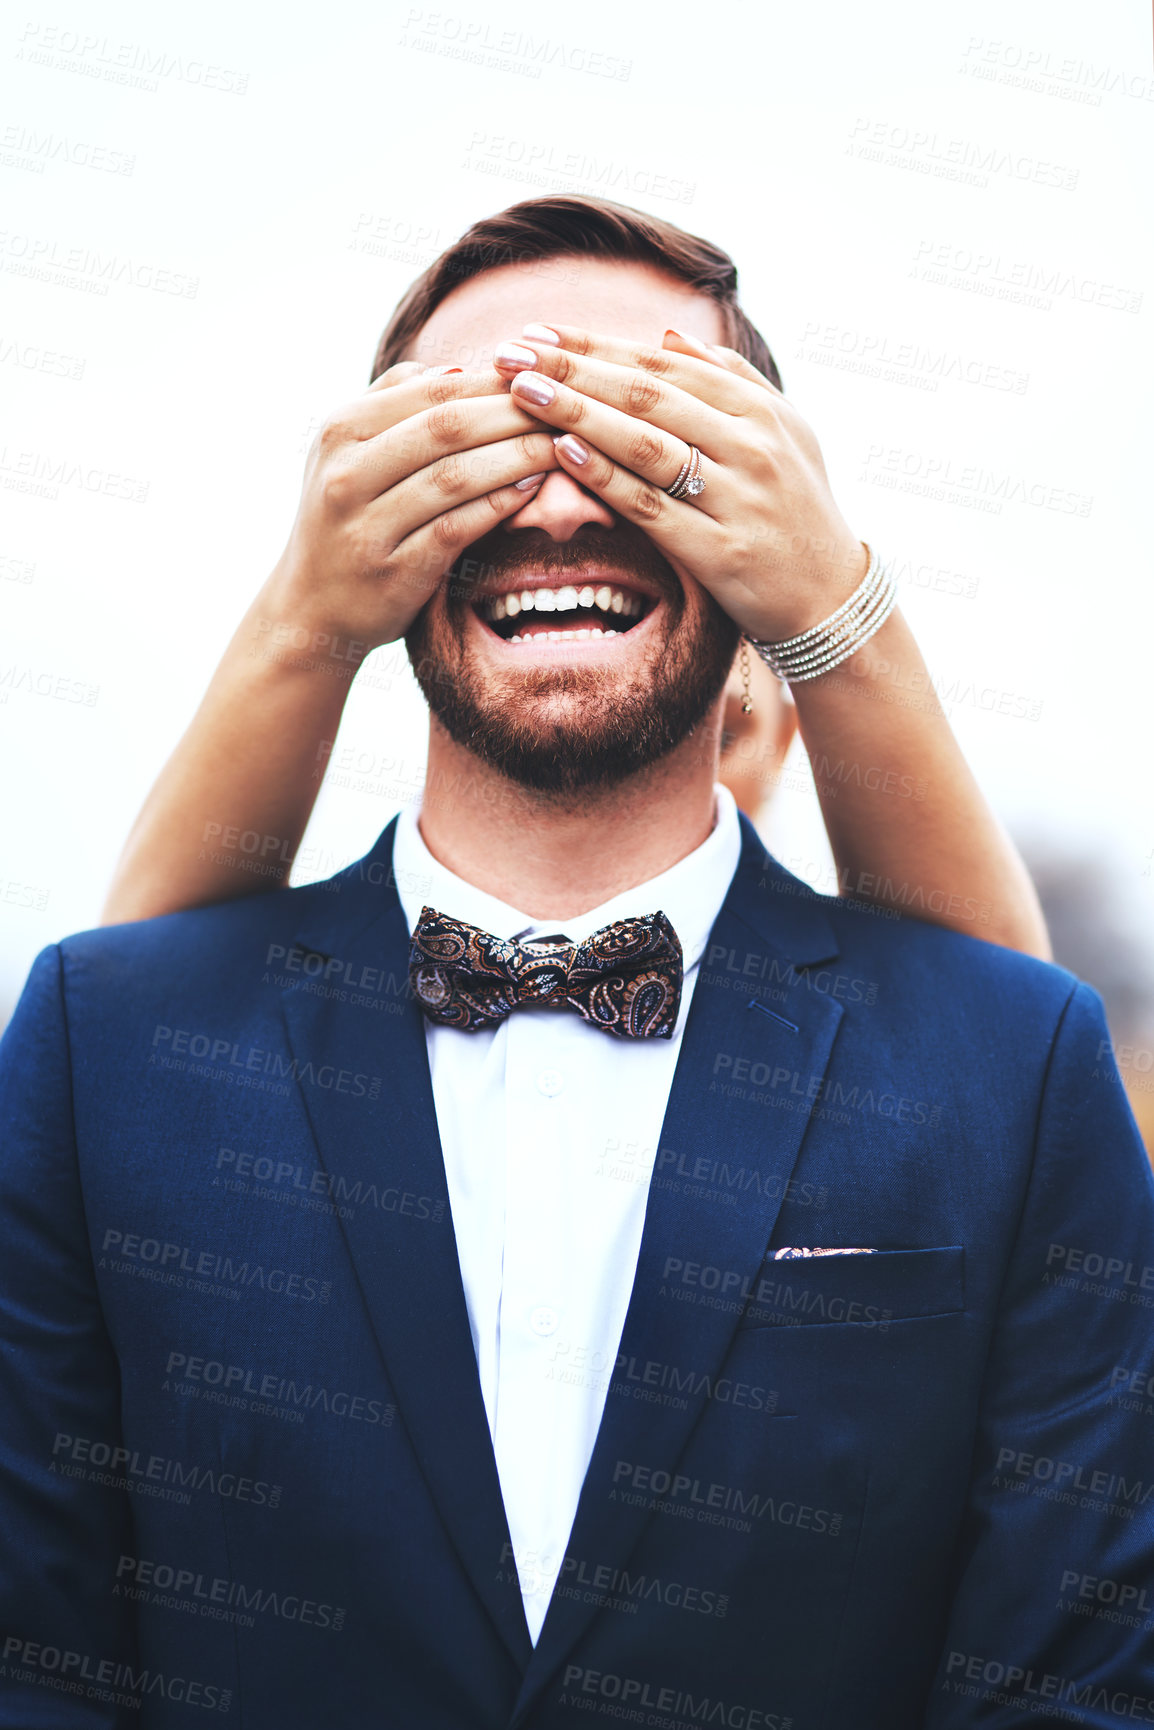 Buy stock photo Shot of a happy bridegroom getting his eyes covered by his bride on their wedding day